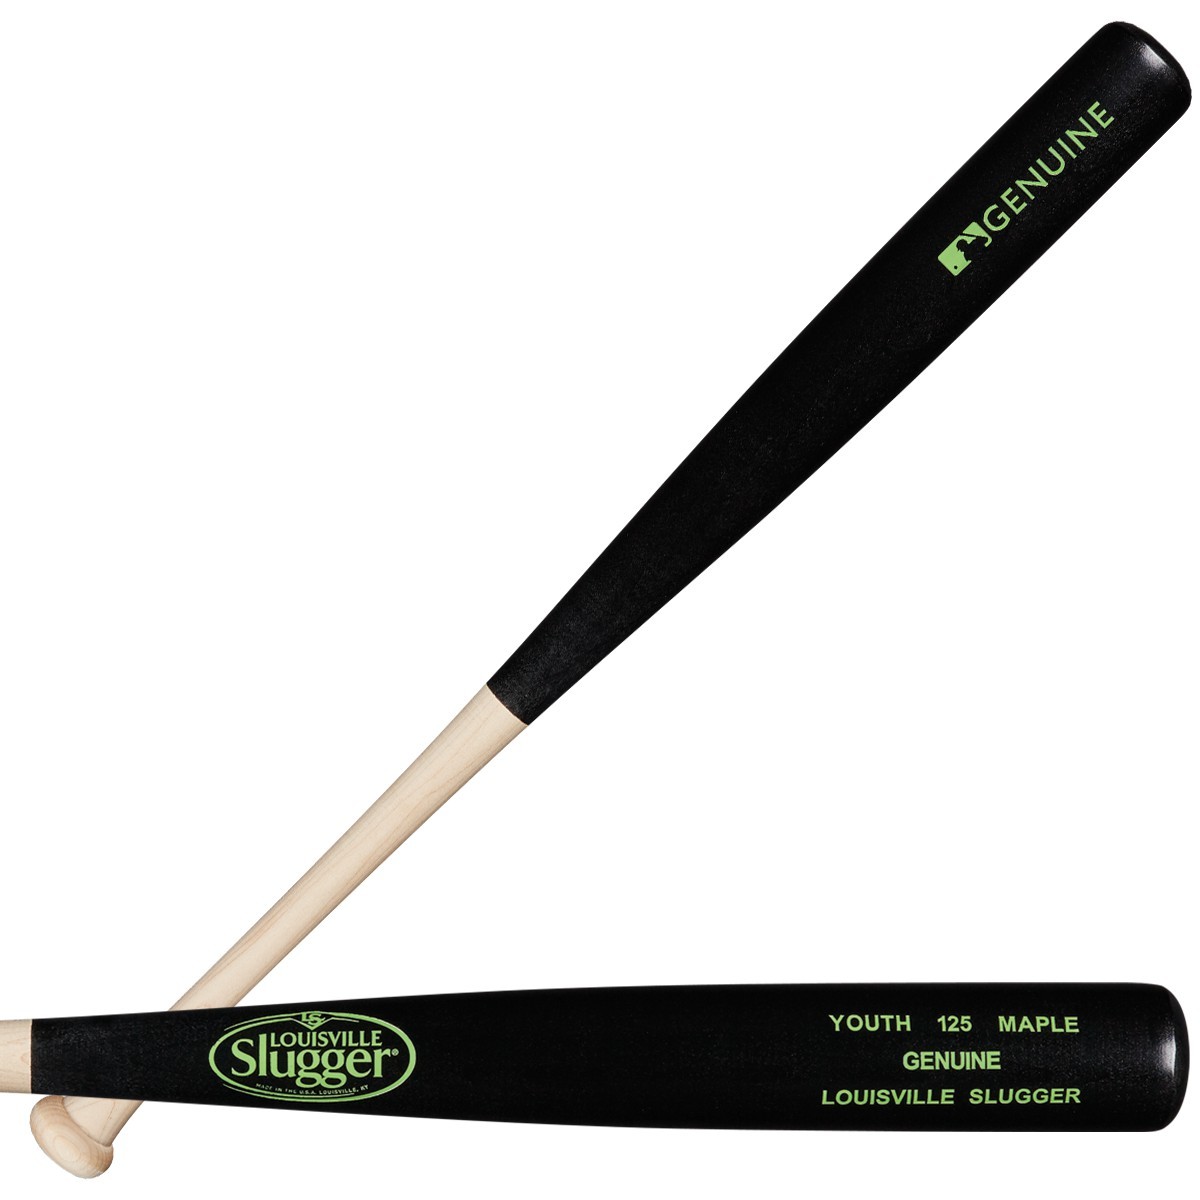 louisville-slugger-youth-125-maple-genuine-wood-baseball-bat-30-inch WTLWYM125A1630 Louisville 887768509064 <span>Priced for every budget and built from dependable maple wood youth